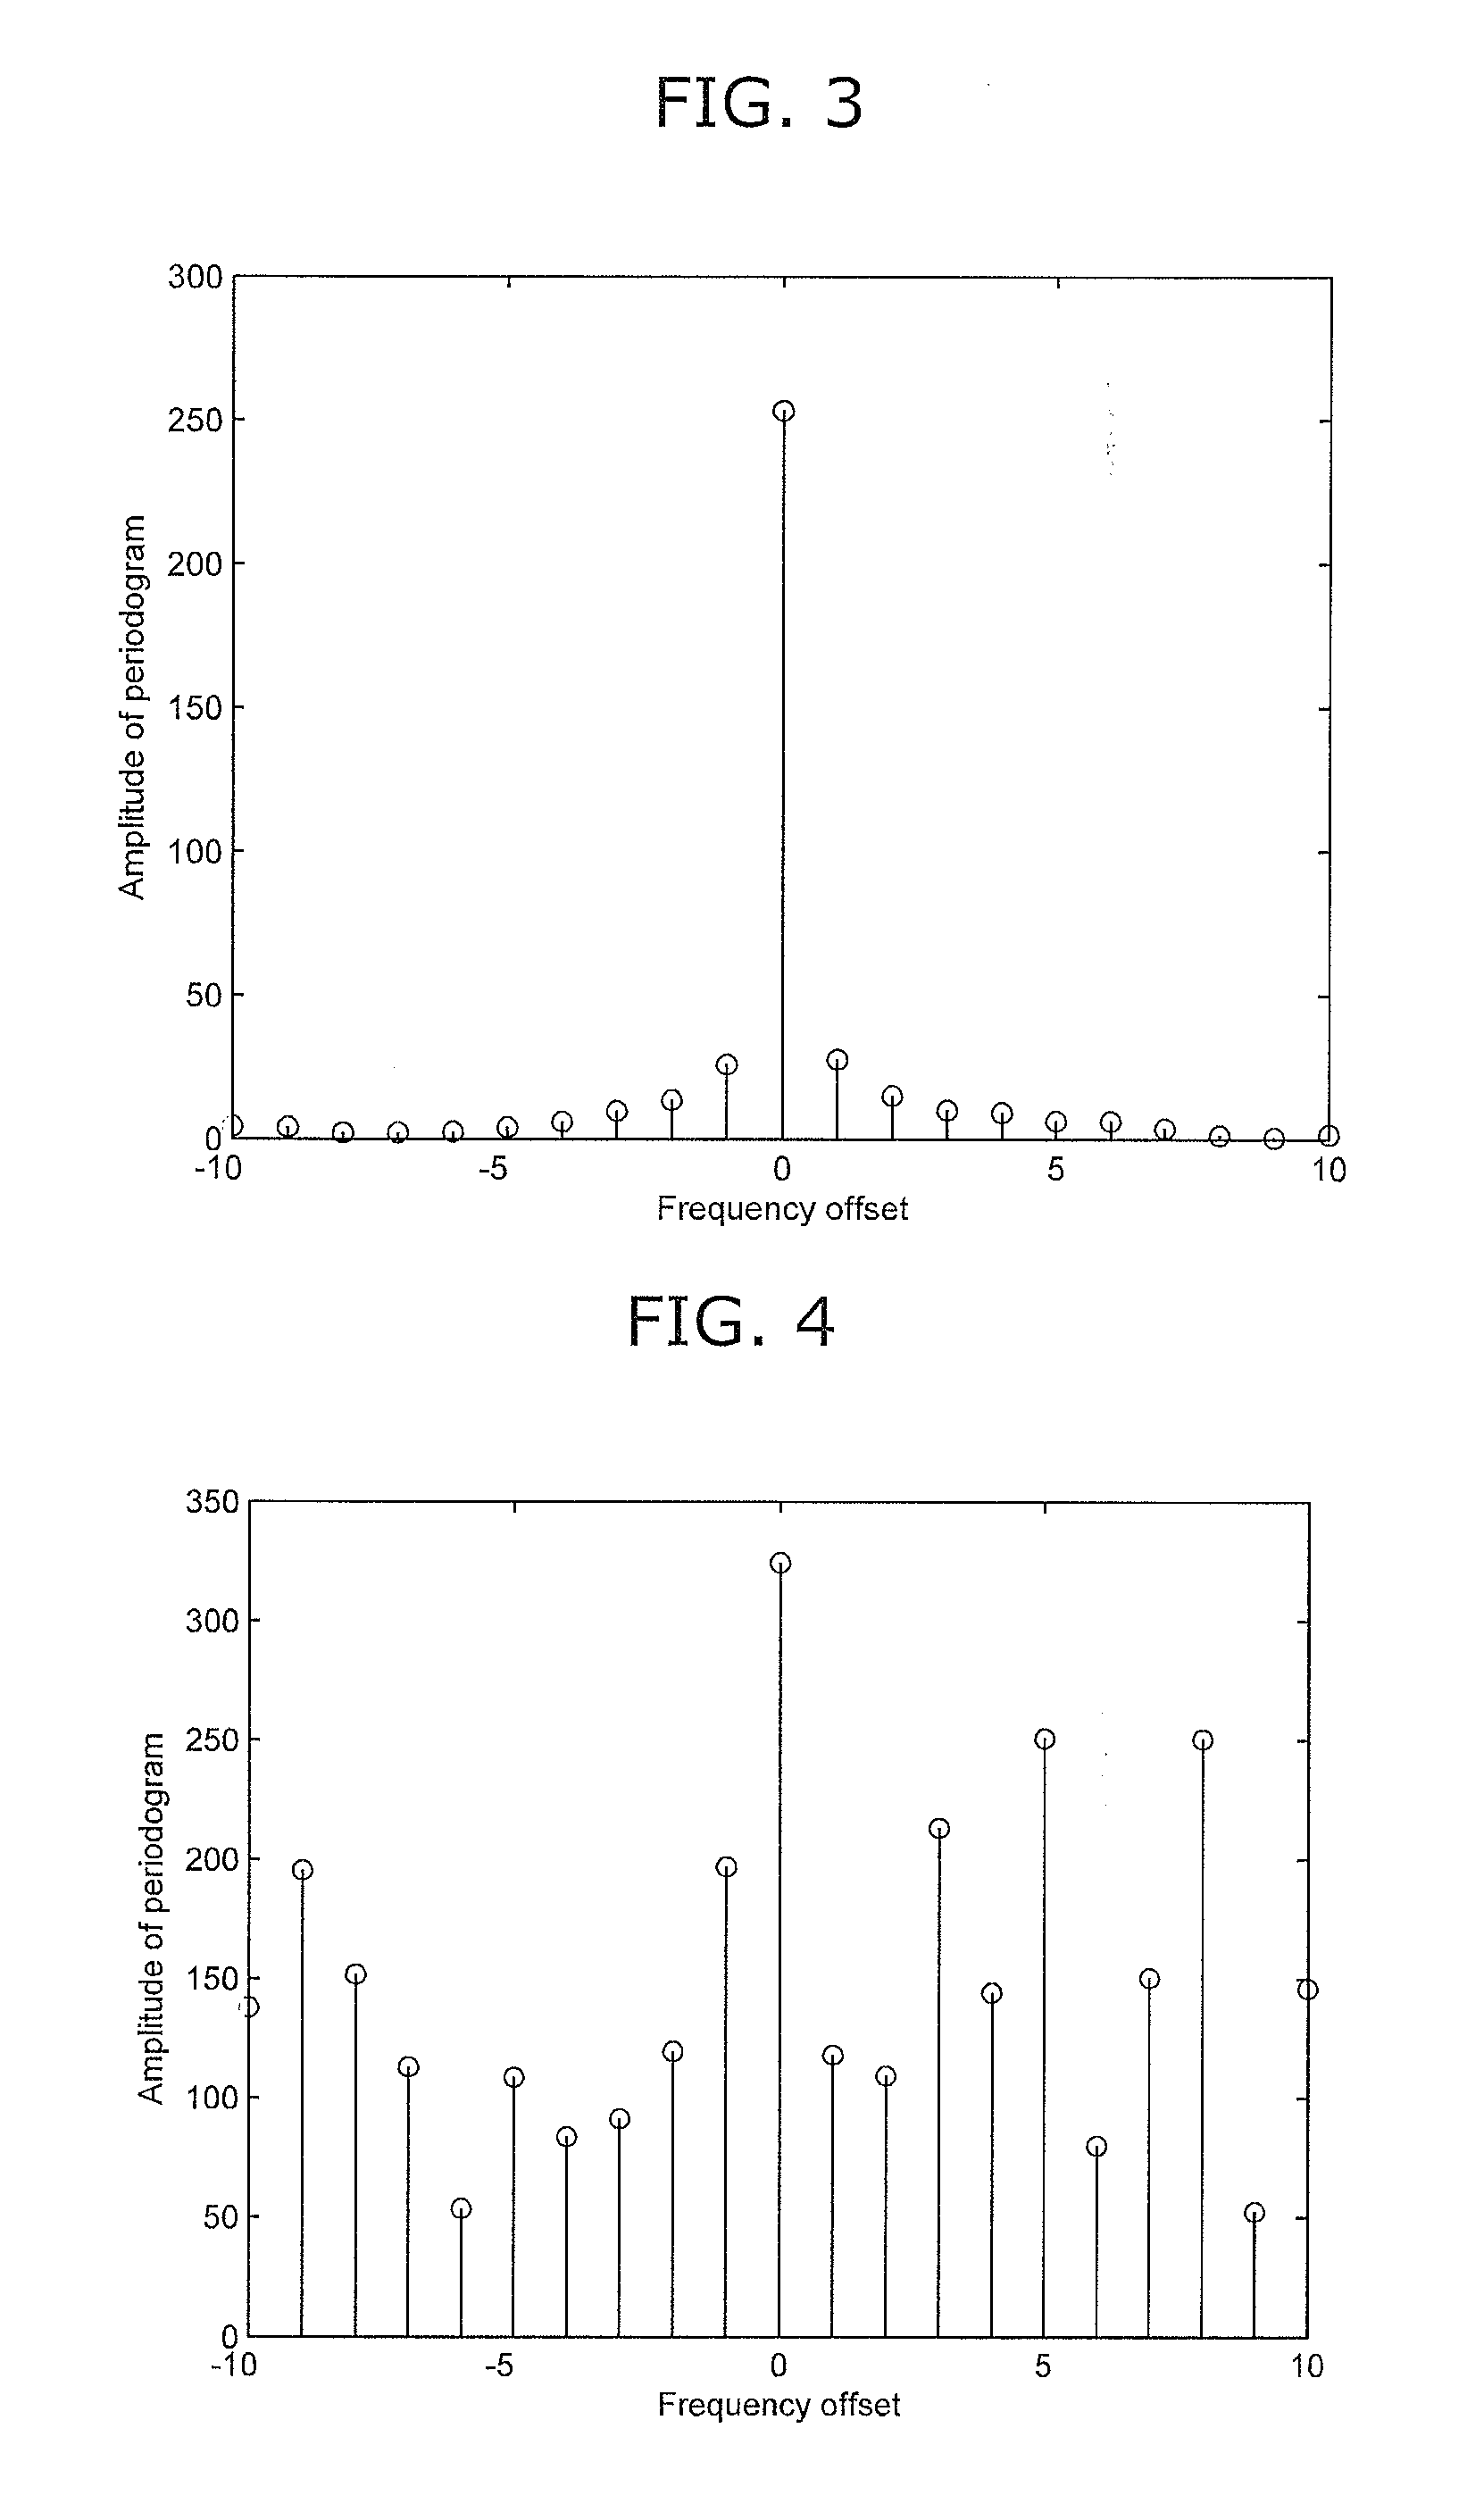 Apparatus and method for receiving data in communication system